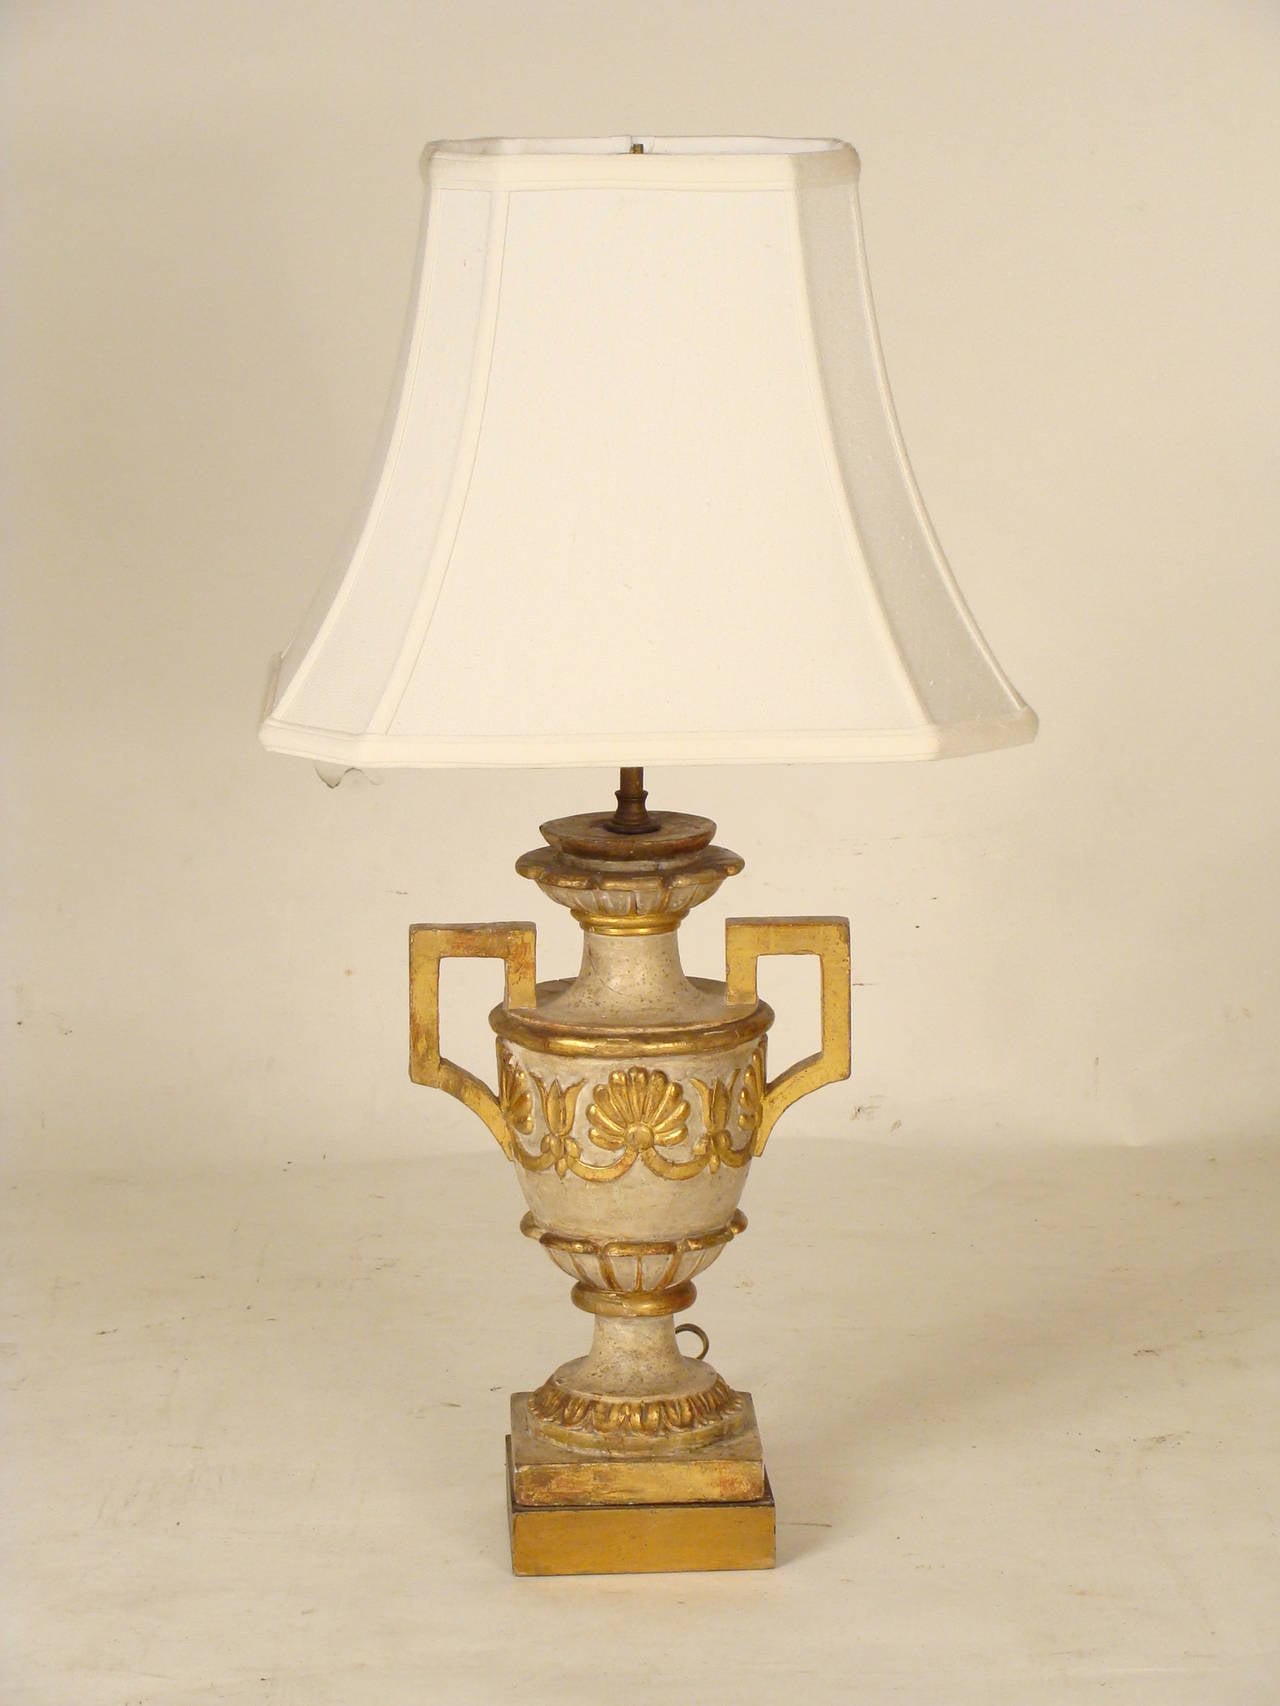 Continental neoclassical style painted and giltwood decorated table lamp, late 19th century. This lamp has very nice quality gilding and crusty paint. The height from the base to the electrical fittings is 16